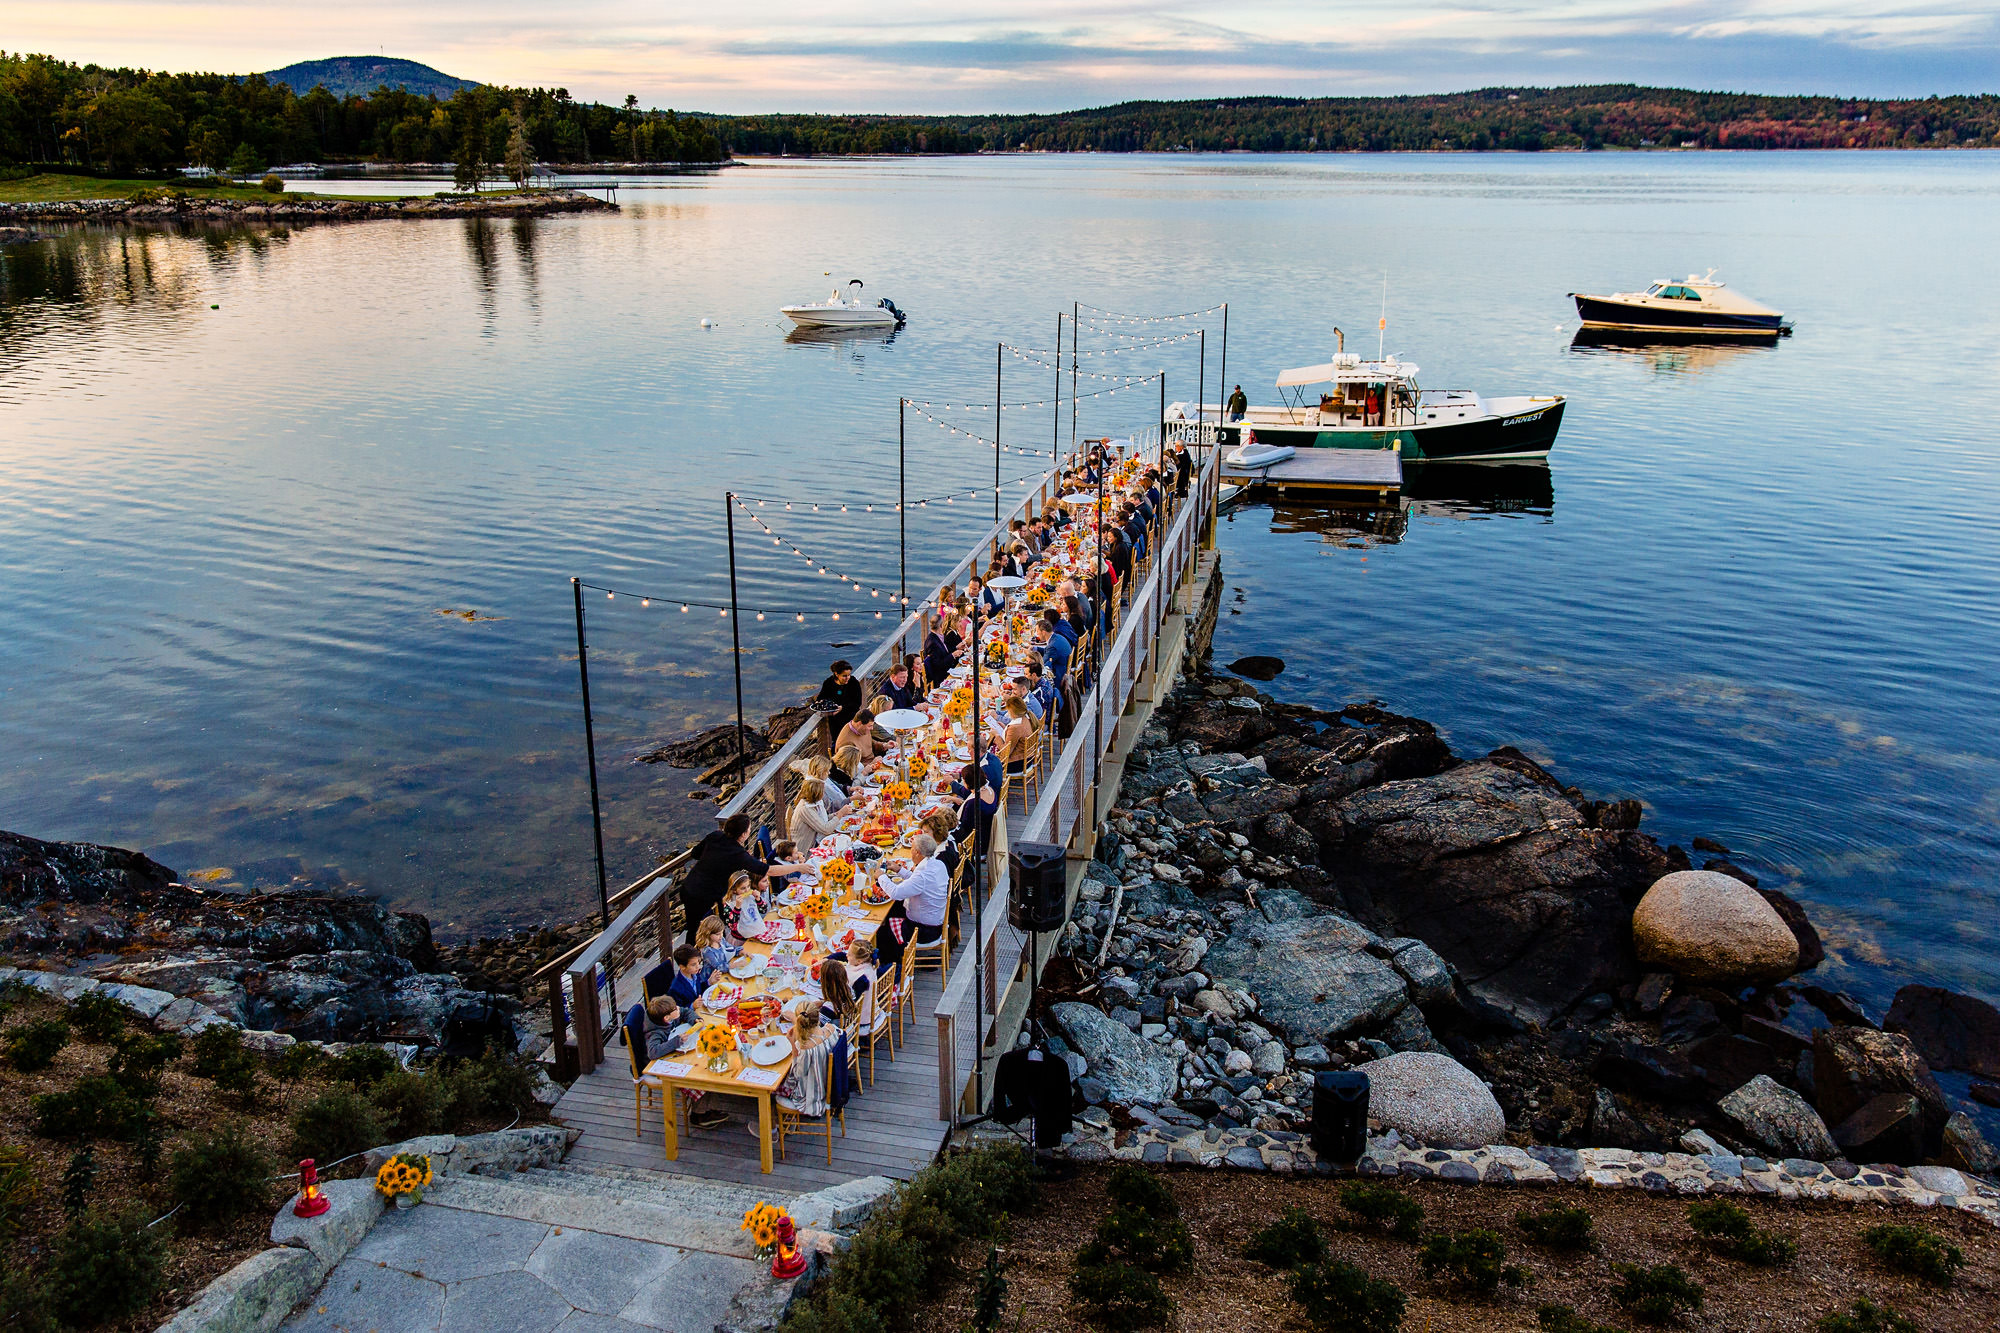 An outdoor wedding rehearsal in Blue Hill, Maine.